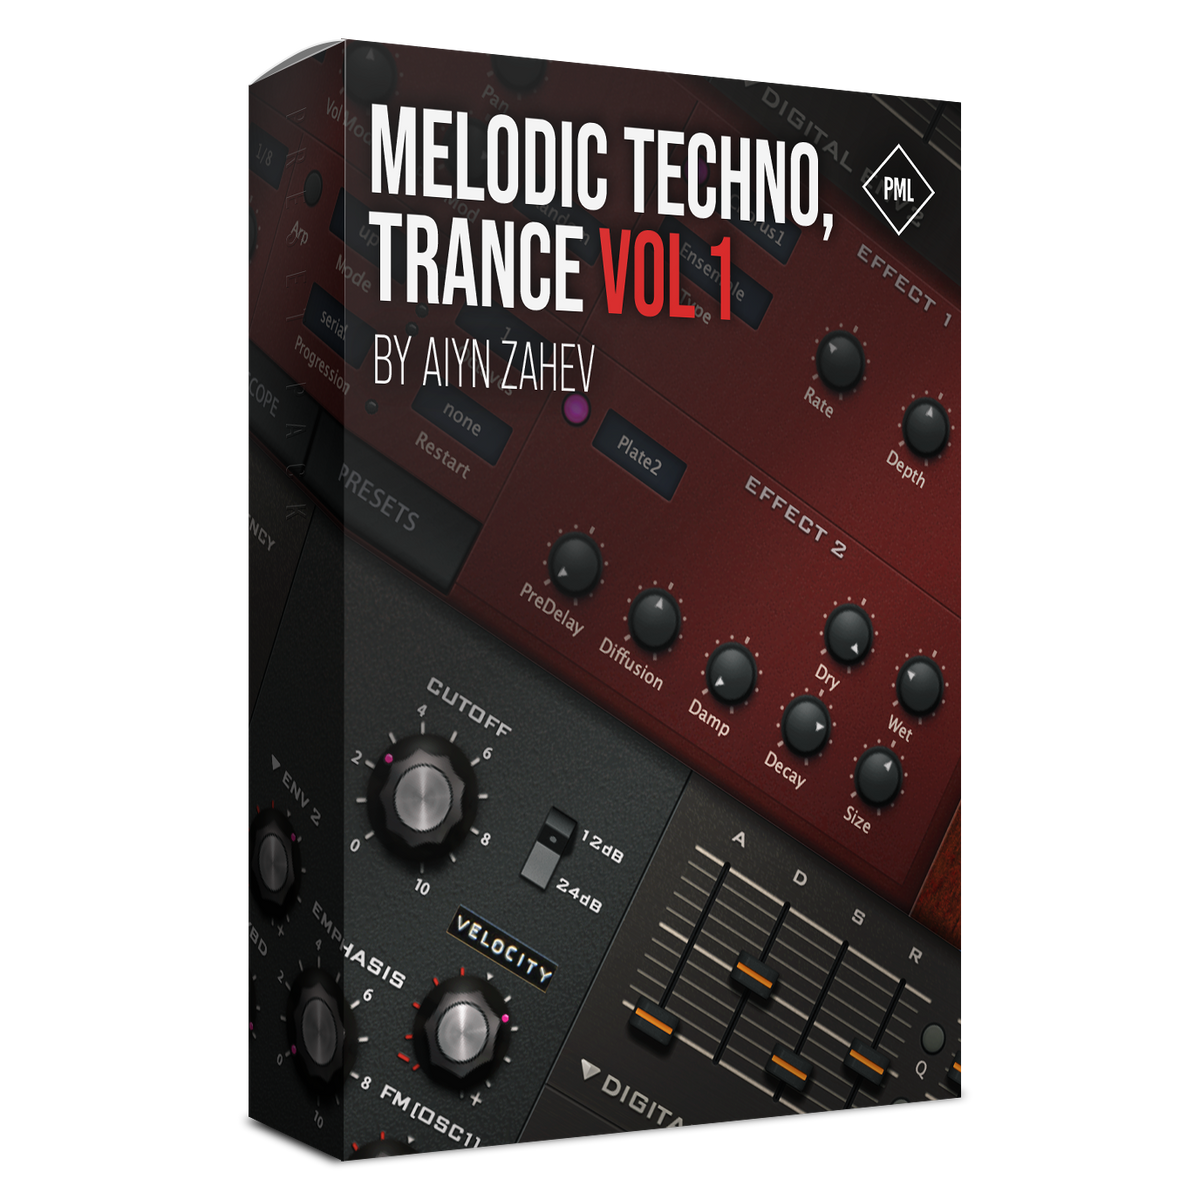 Melodic Techno and Trance - Diva Presets by Aiyn Zahev Product Box